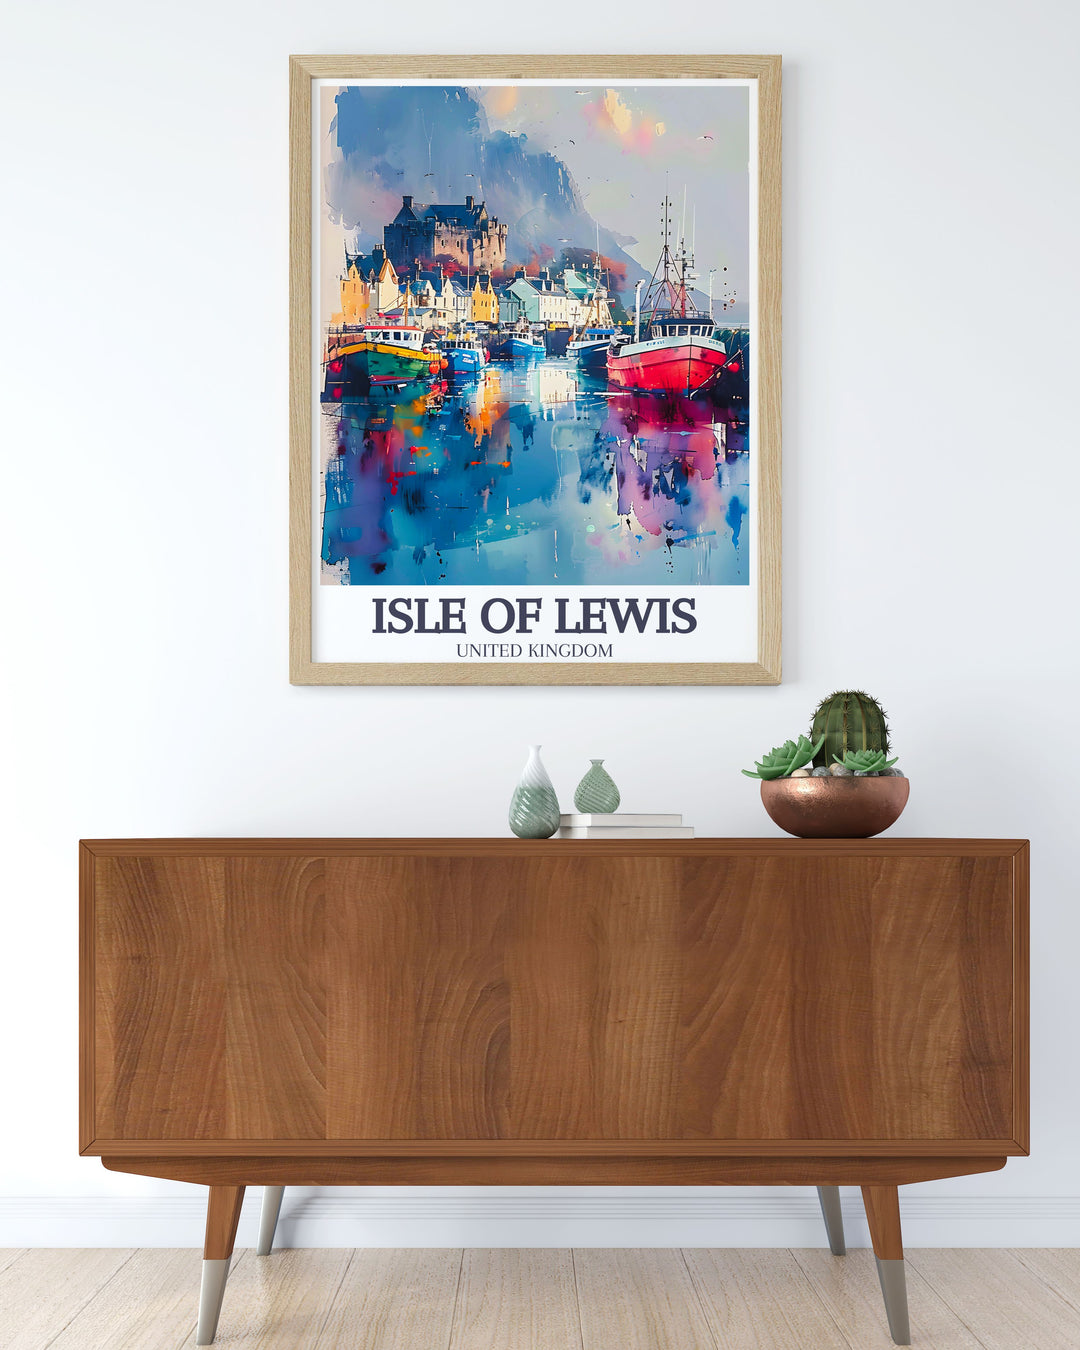 Modern wall decor featuring the rugged landscapes of the Isle of Lewis, perfect for adding a touch of natural beauty to your home.